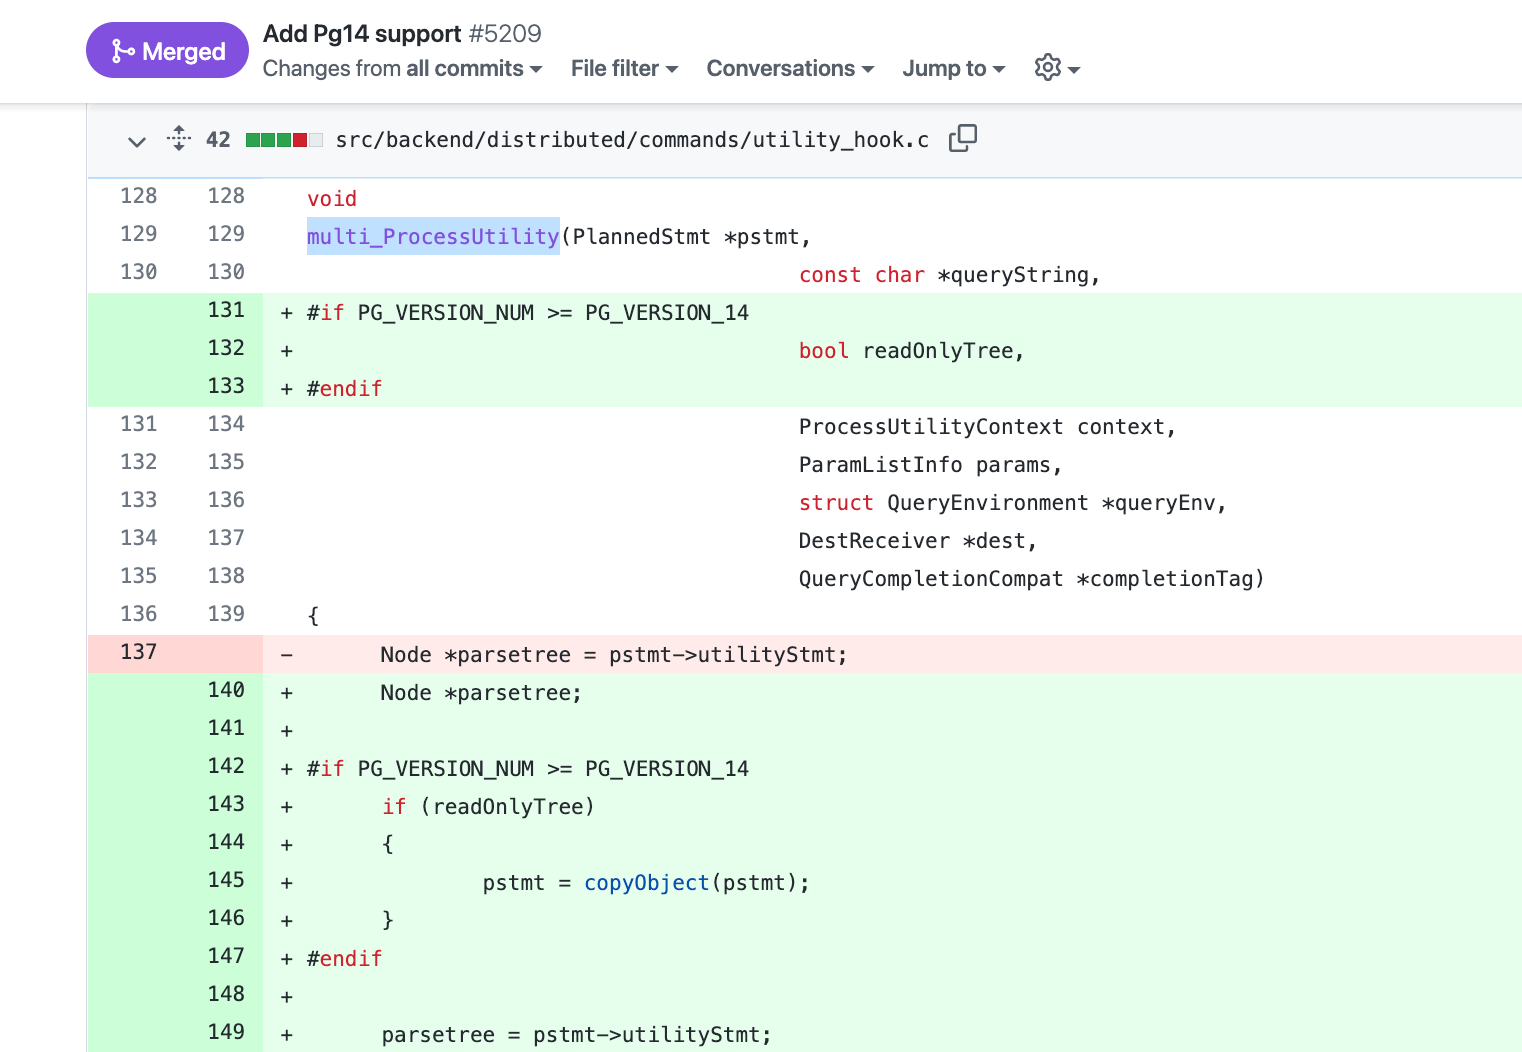 Citus Github repo code diff to add PG14 support utility hook